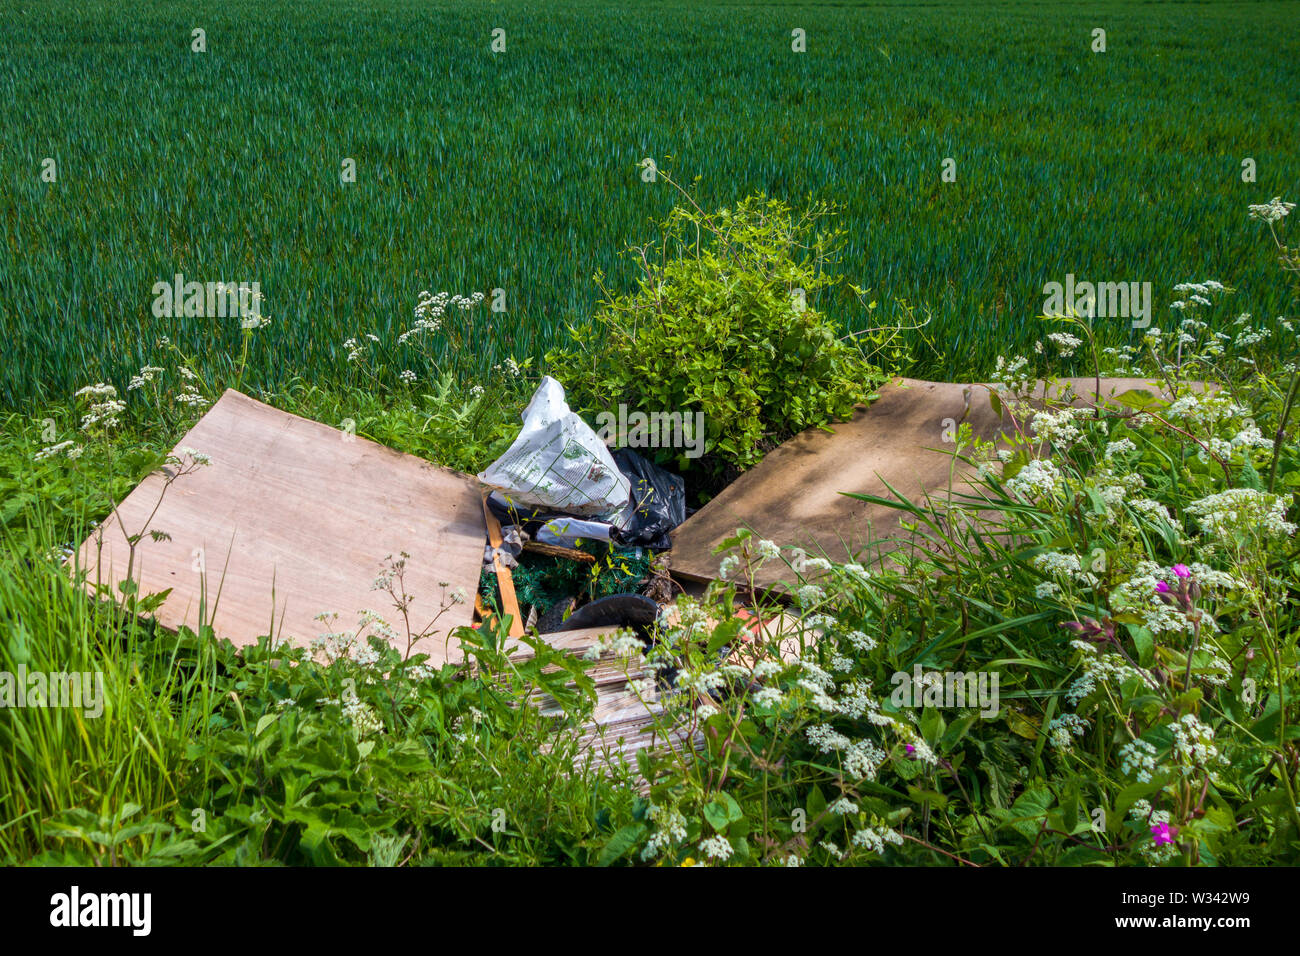 Fly-tipping of household waste in a farmers field in the countryside UK. Stock Photo